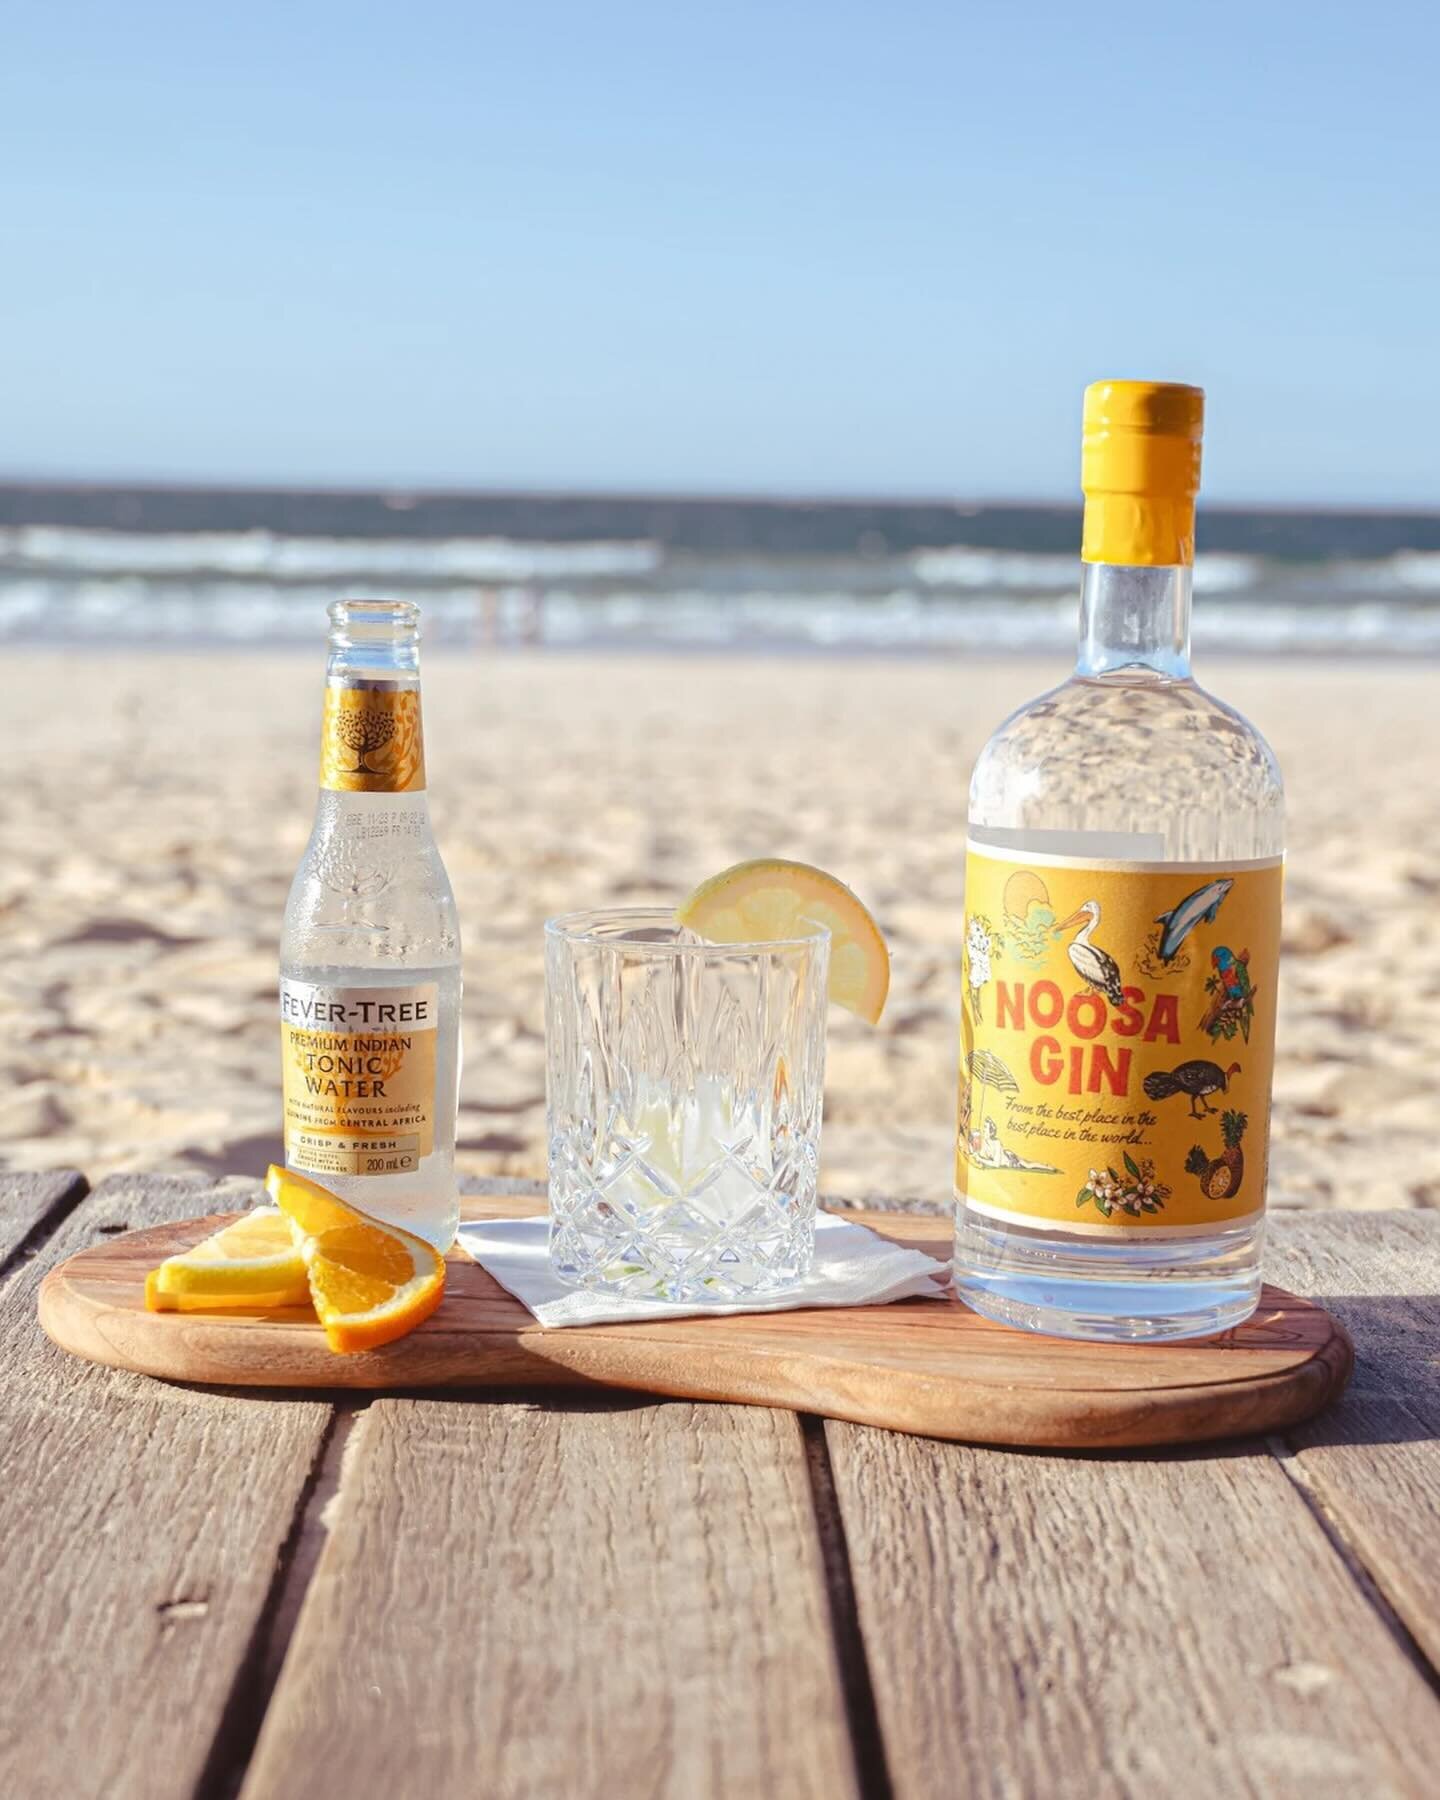 Consider this your invitation to indulge in these exquisite locally crafted gins from @noosagin on your next visit at Boardwalk bistro.

Both are the perfect way to unwind after a sunny day at the beach!

The Noosa gin is made of botanicals such as j